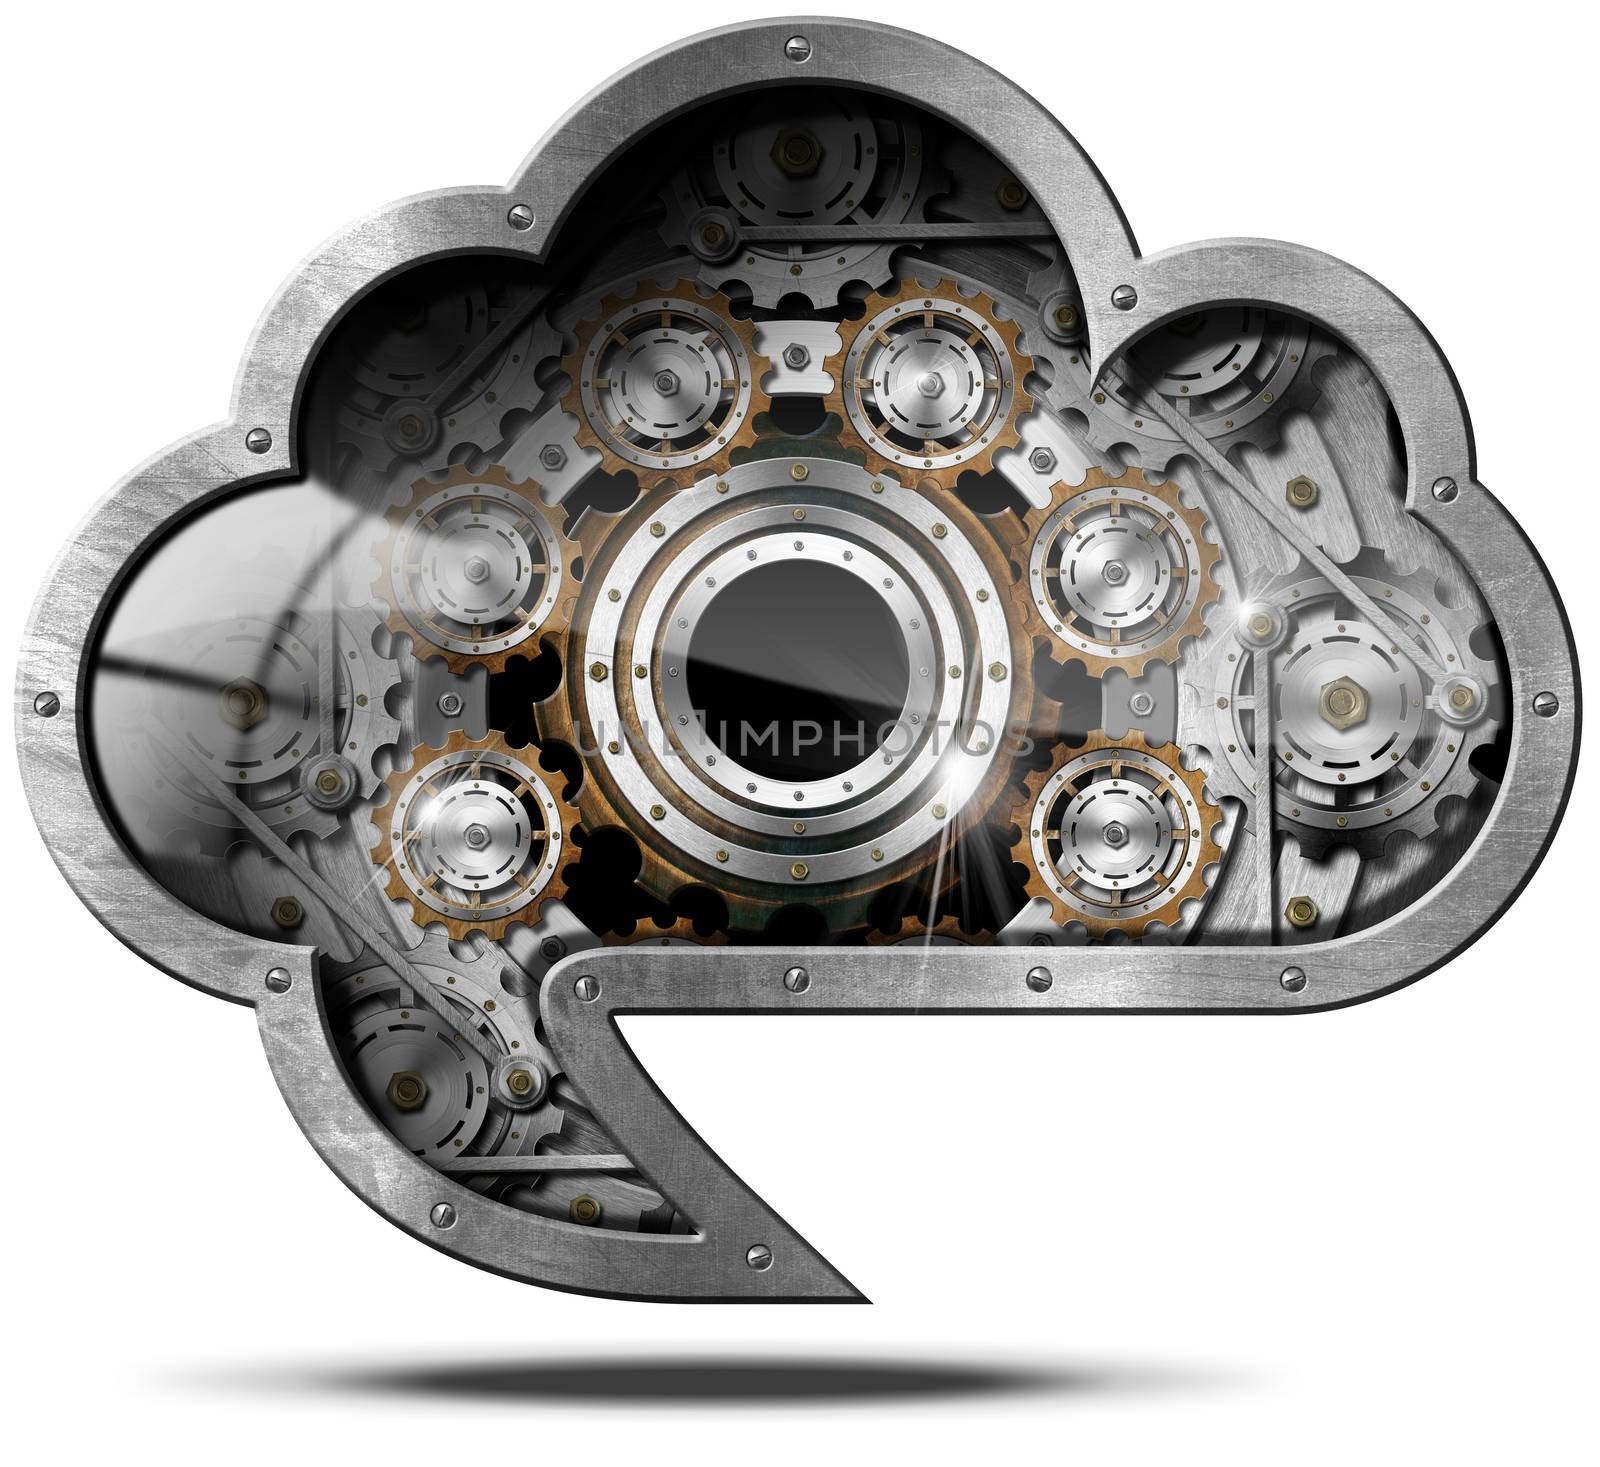 Metallic cloud in the shape of speech bubble with metal gears. Concept of cloud computing